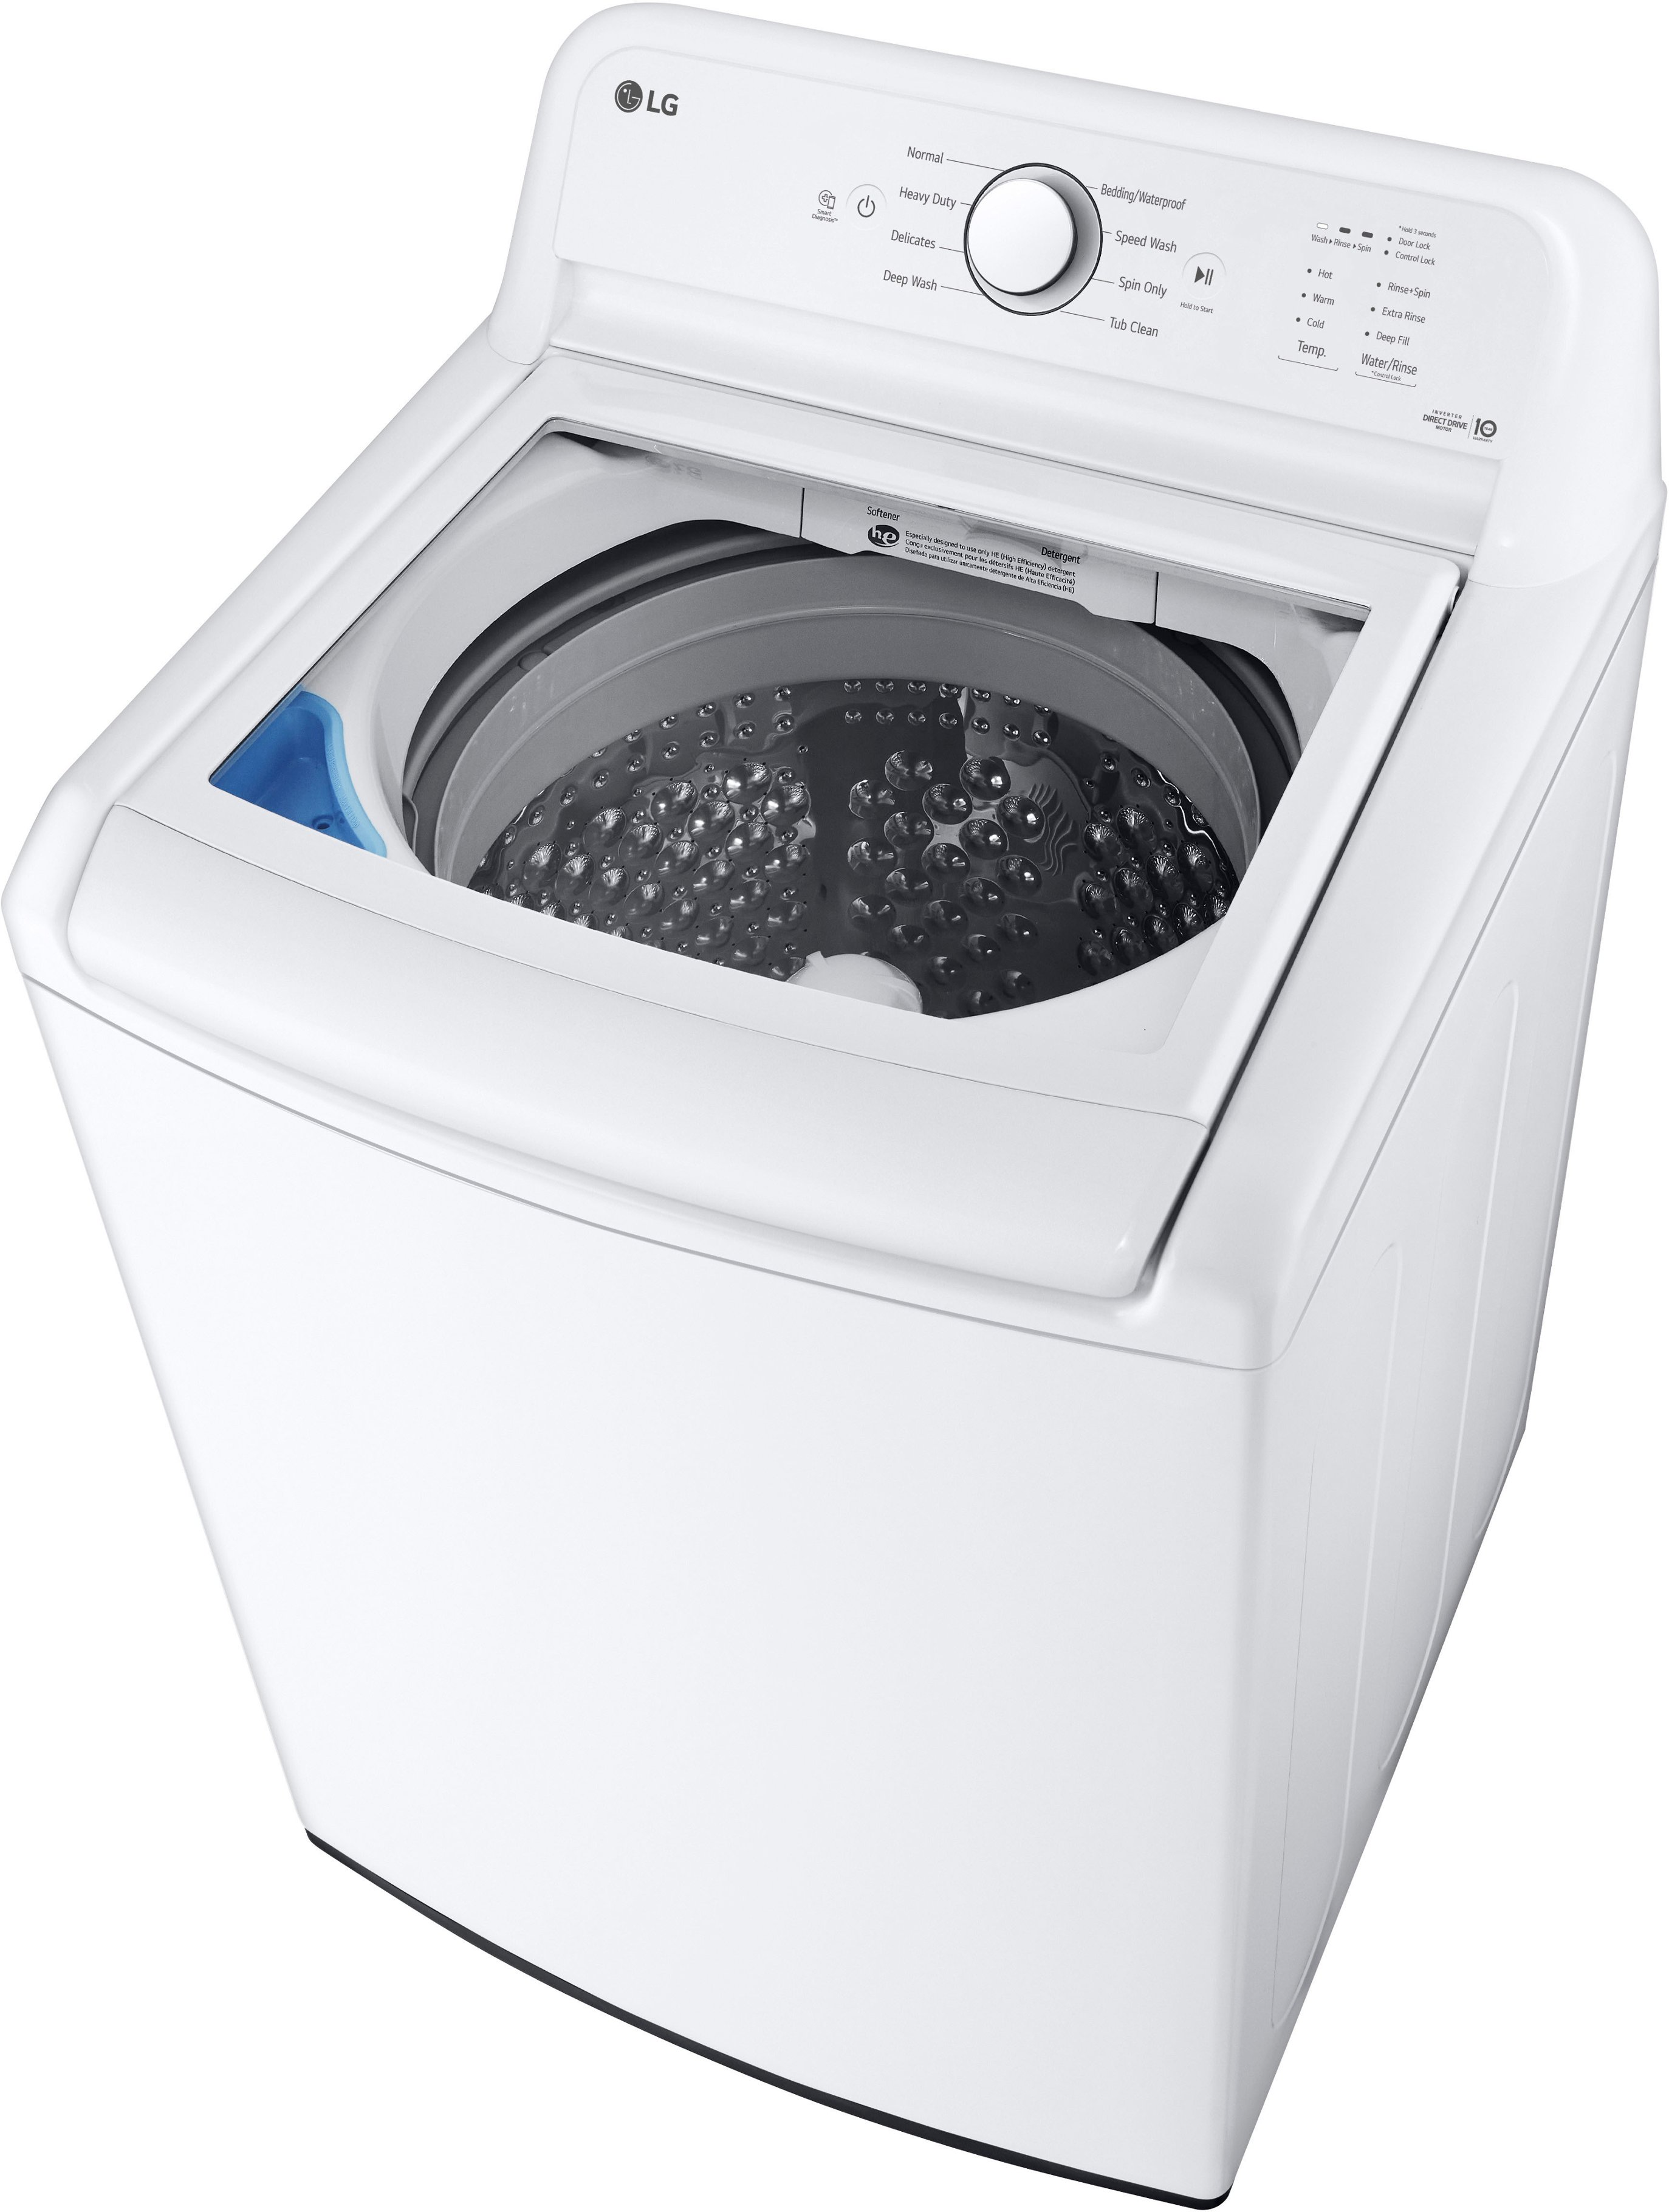 Cu. SlamProof WT6105CW 4.1 Lid LG - White Washer Top Load Buy Ft. Glass Best with